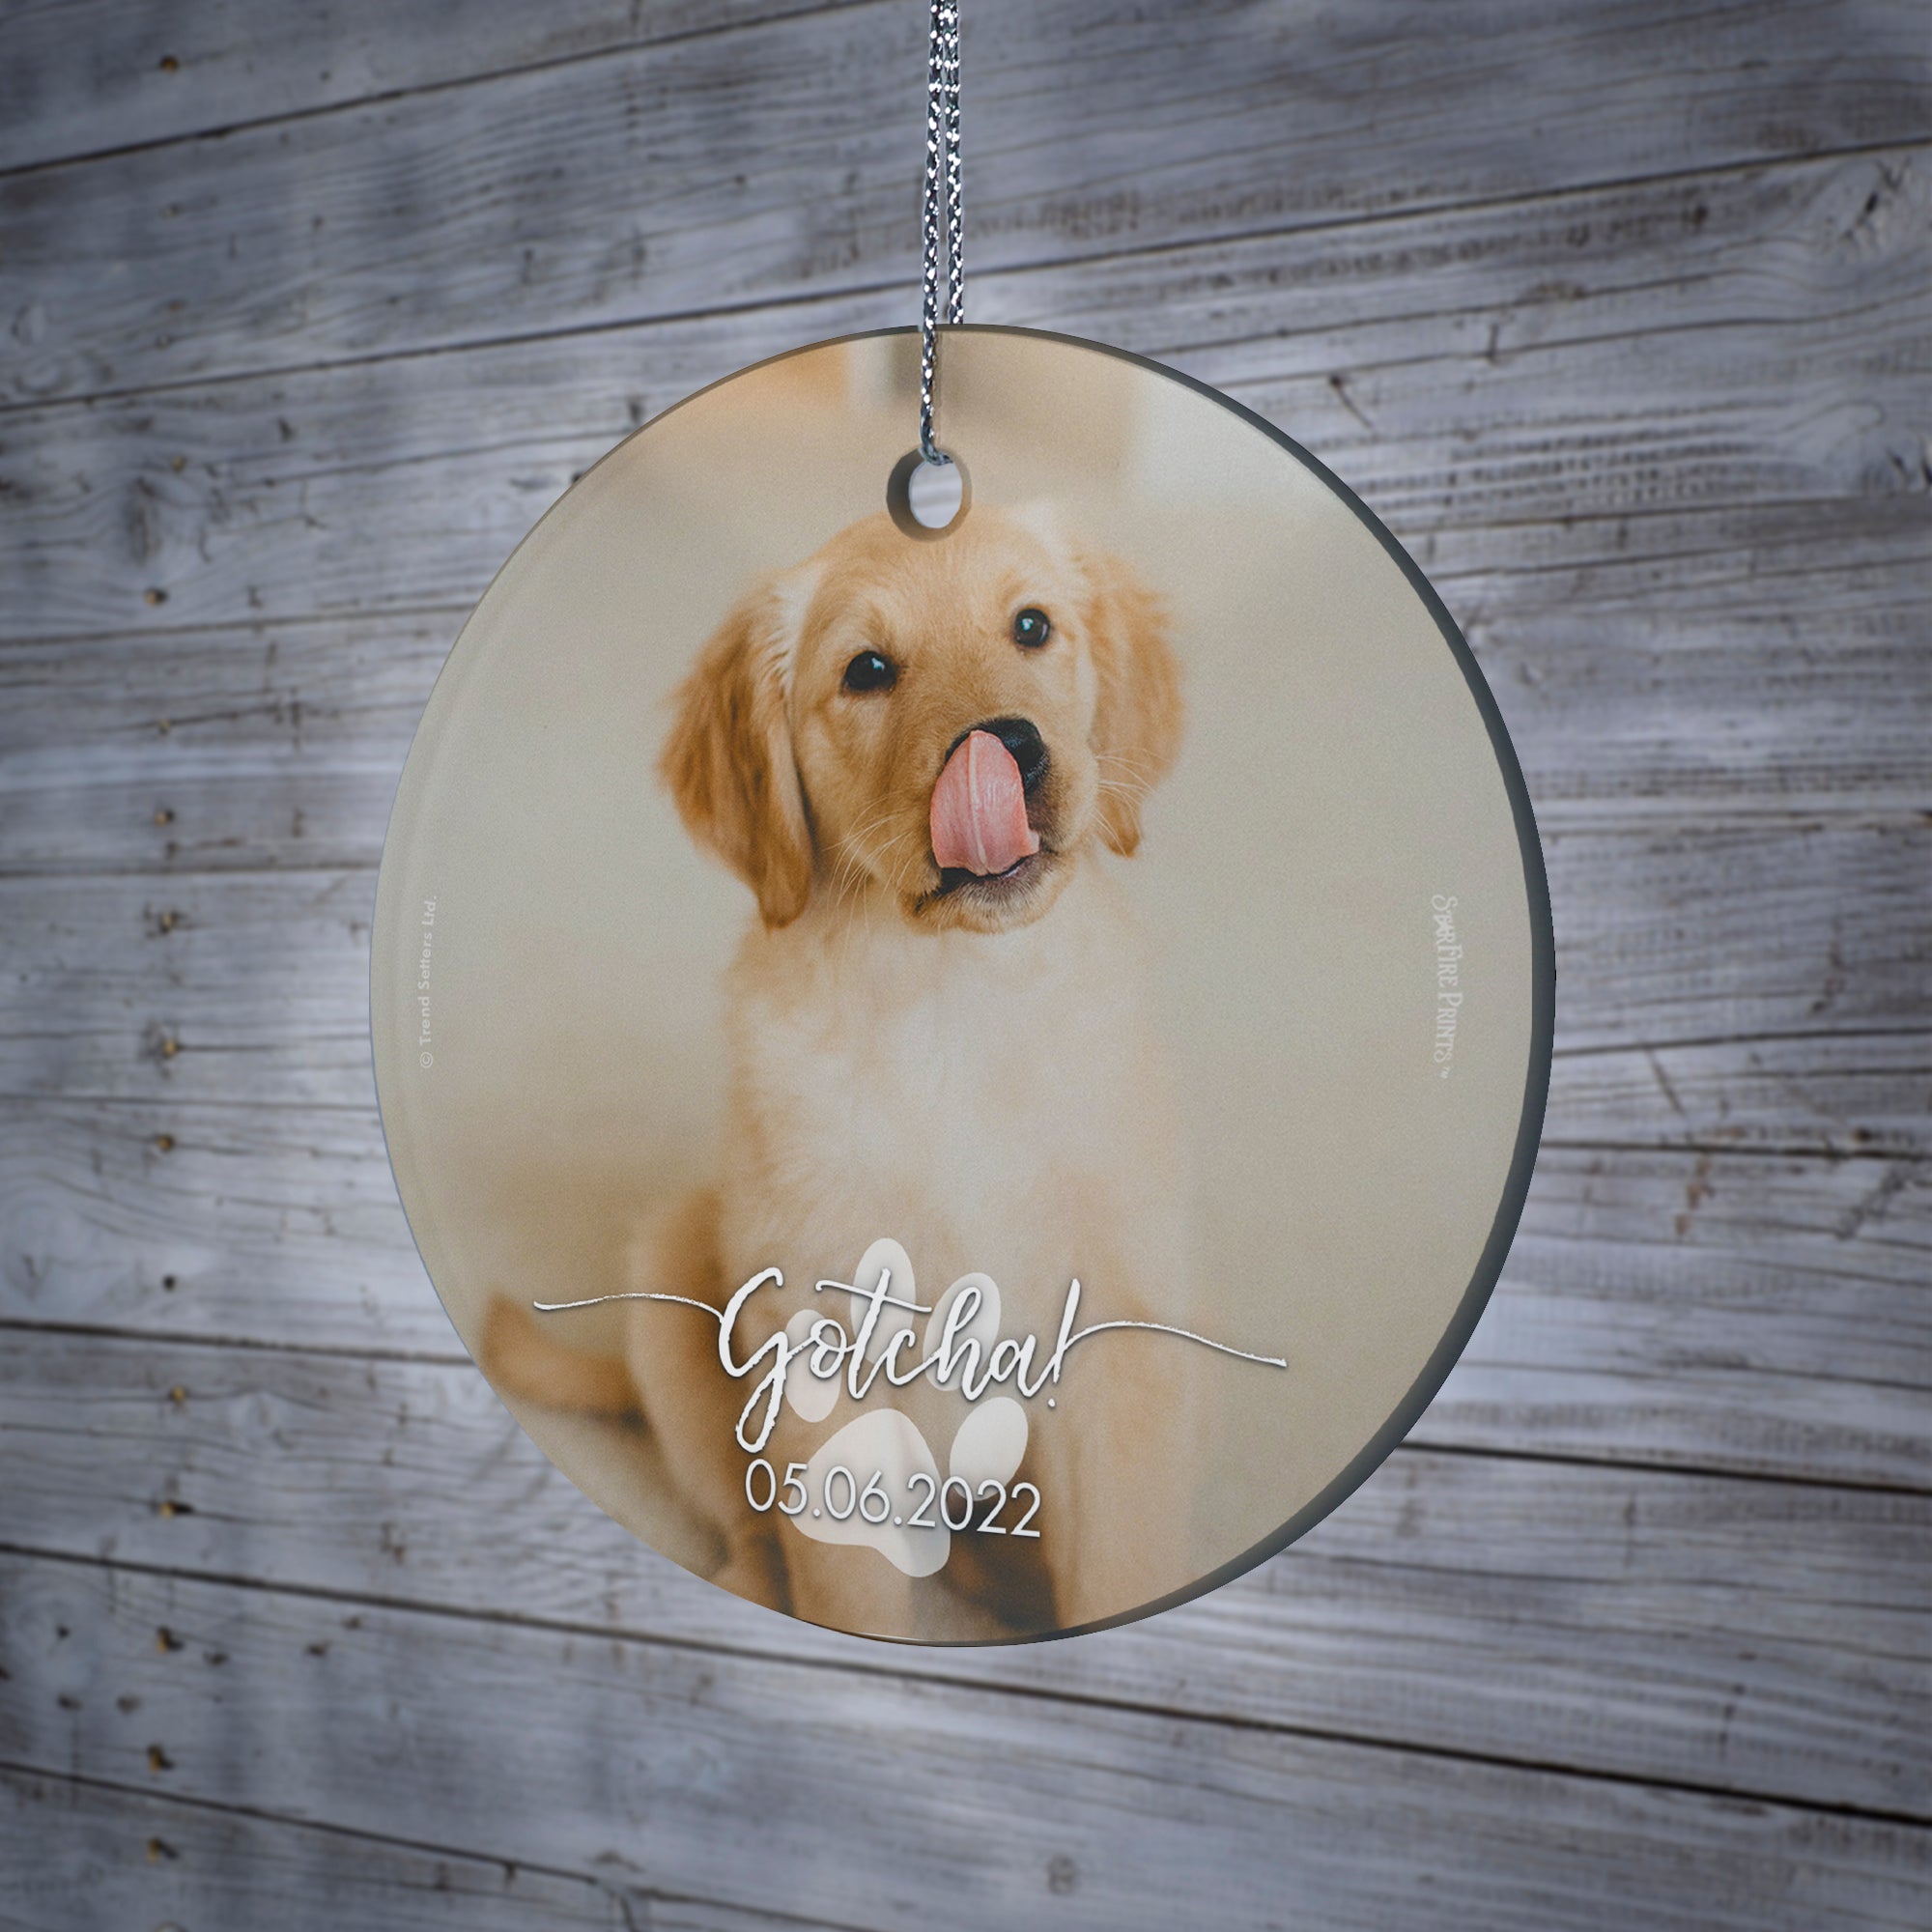 Pet Collection (Gotcha Dog - Personalize with Image) StarFire Prints Hanging Glass Print